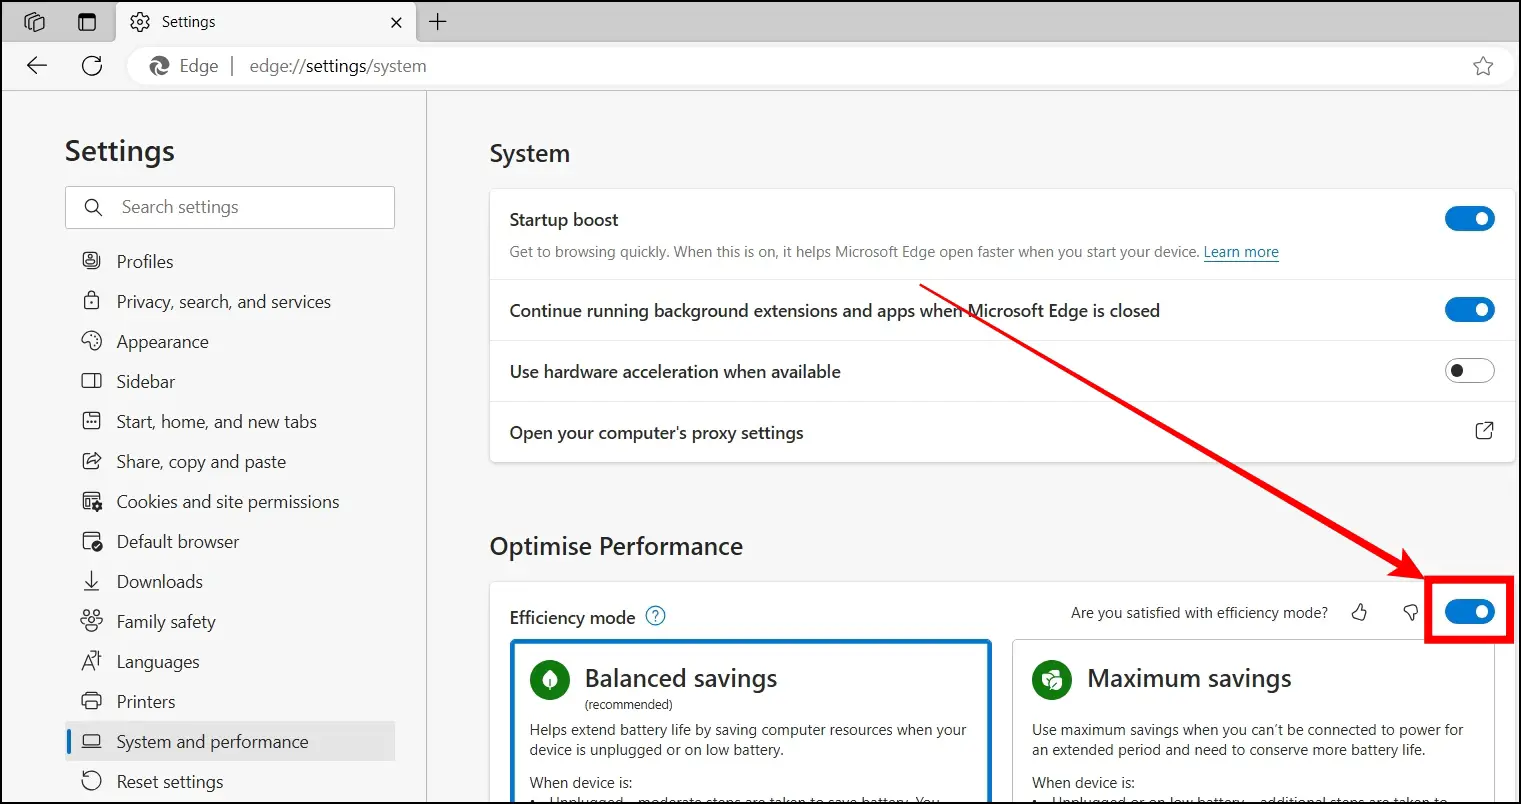 Turn Off Efficiency Mode From The Browser's Settings to Disable Efficiency Mode for Microsoft Edge